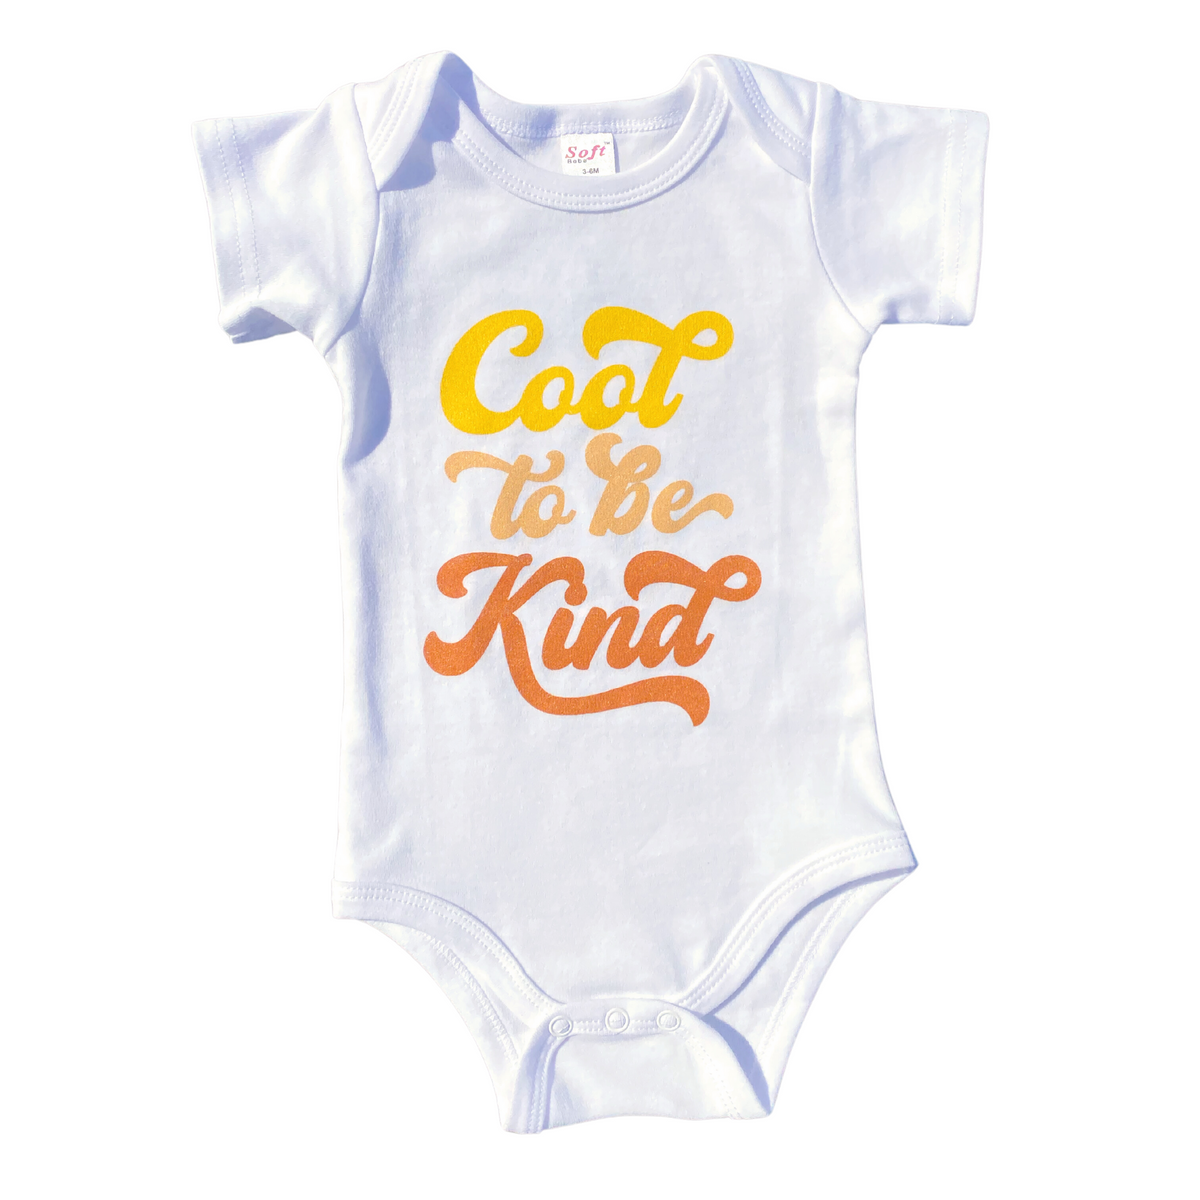 Cool to be Kind Baby Onesie